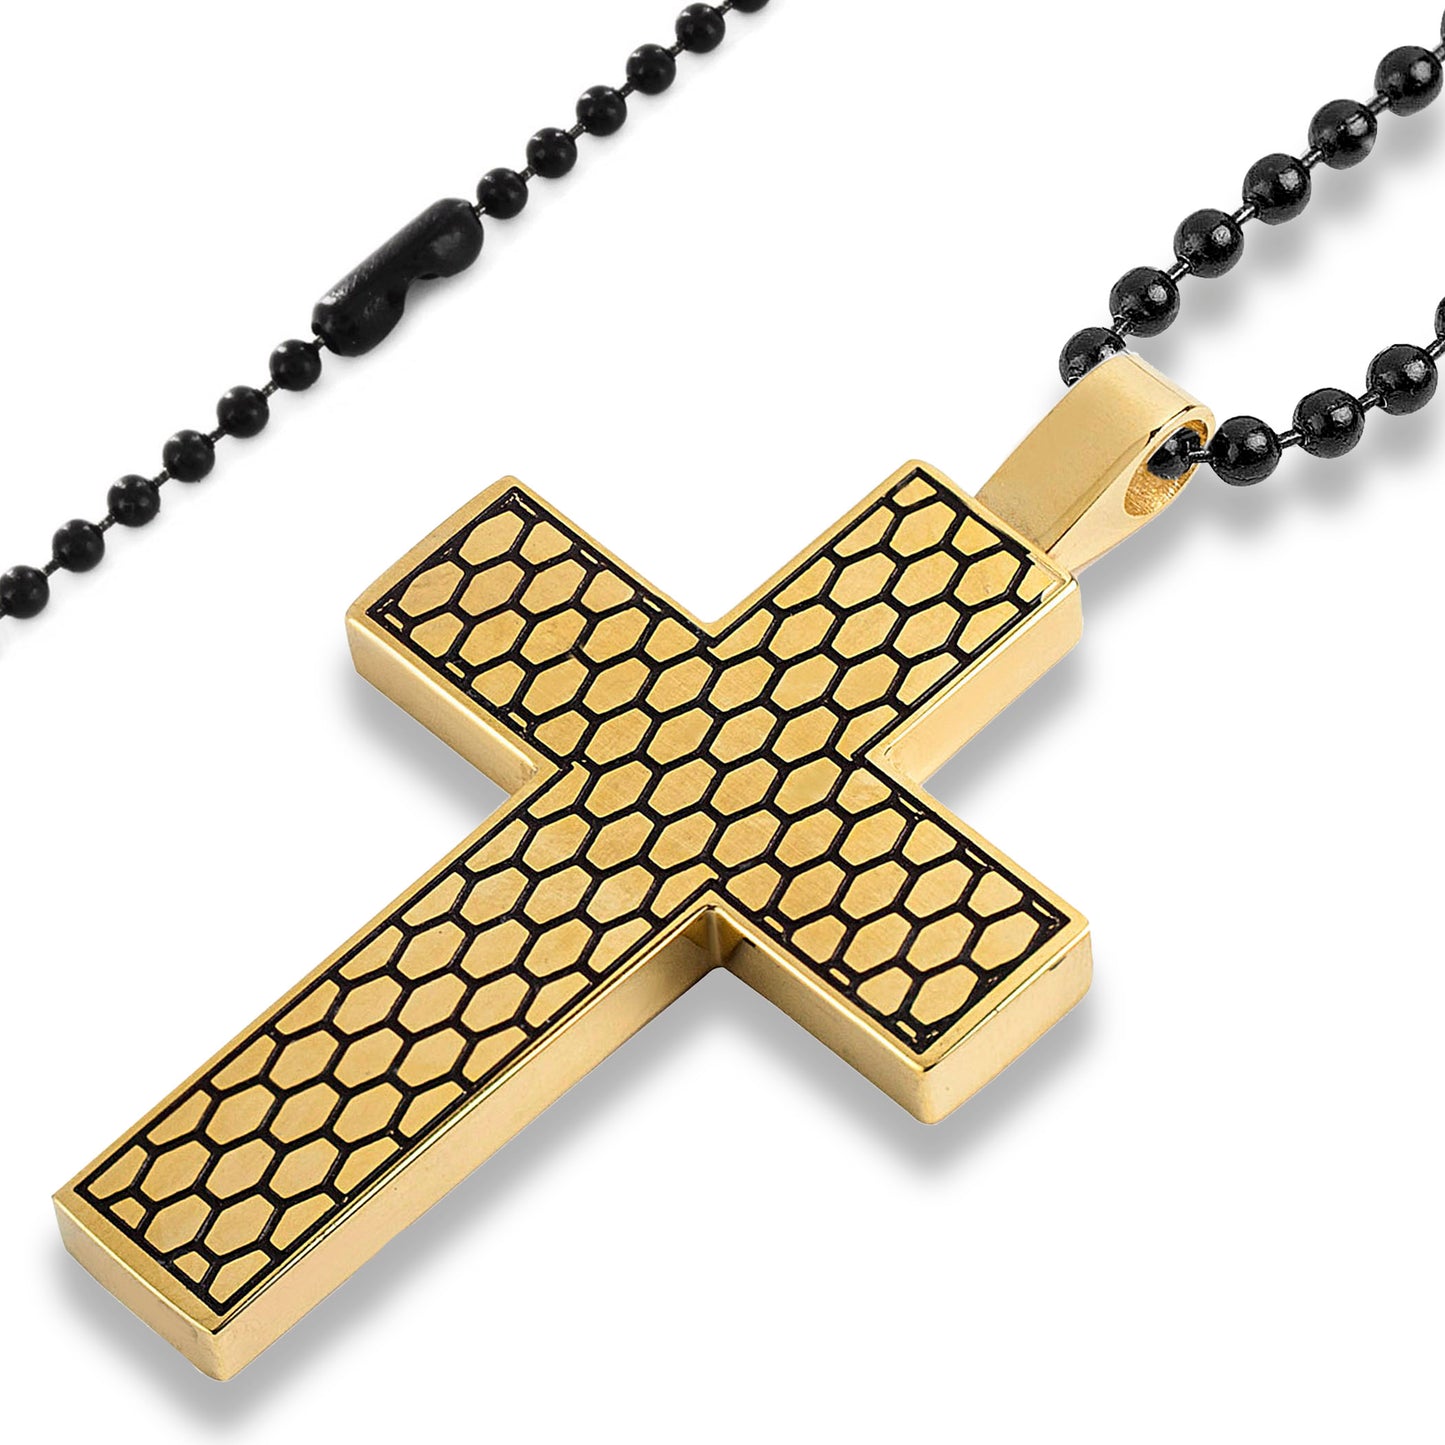 Men's Gold Plated Two-Tone Stainless Steel Honeycomb Texture Cross Pendant Necklace - 24"